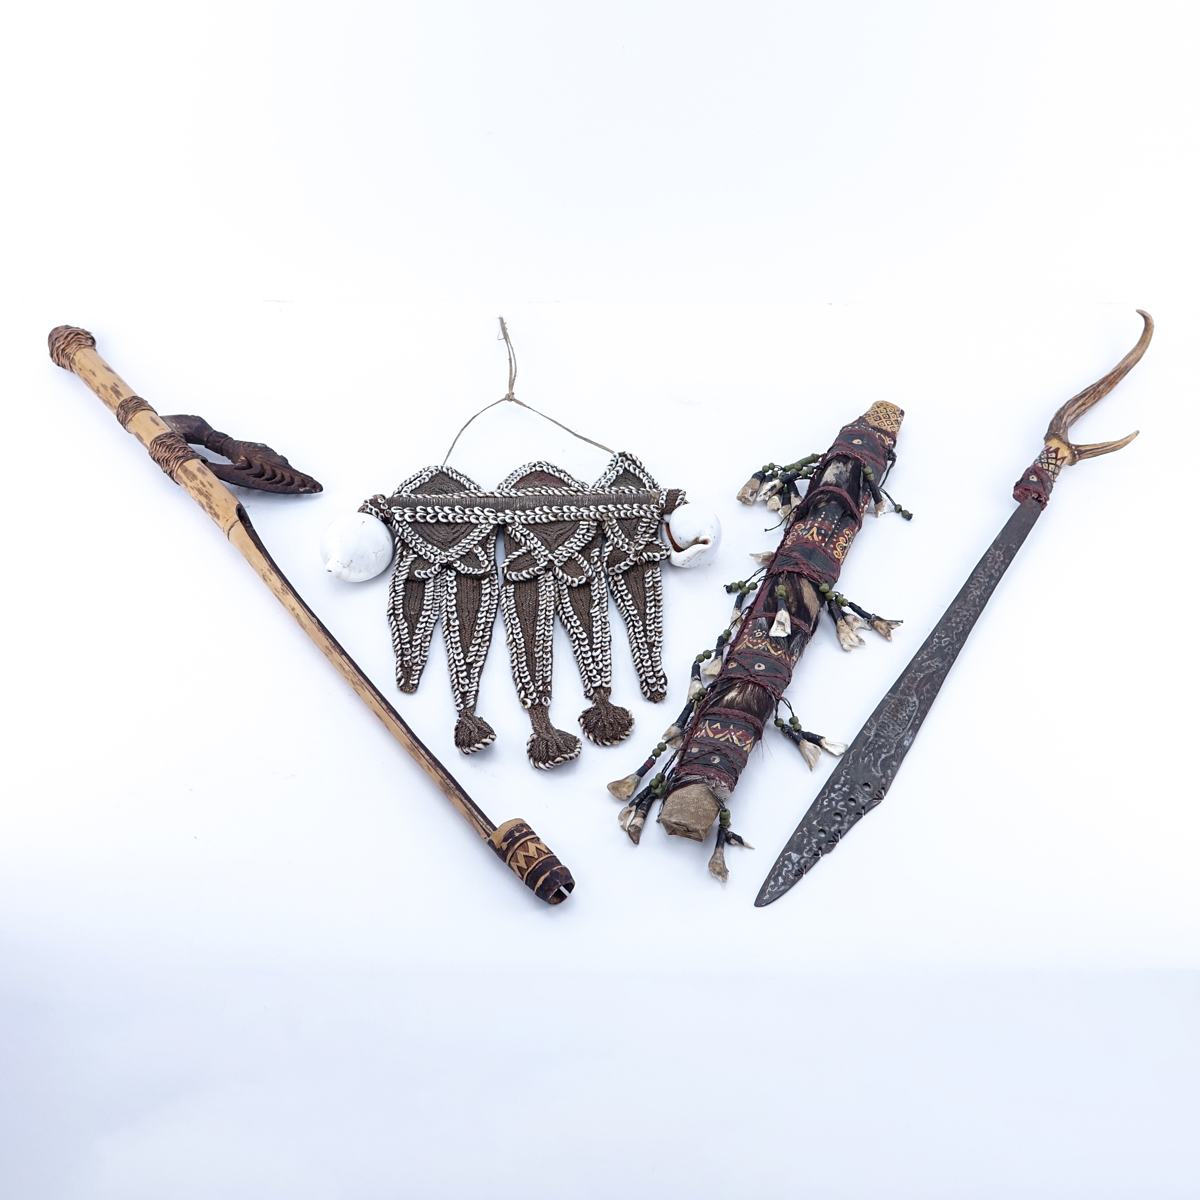 Antique Dayak Tribal Grouping of Three (3): Large Sword with Carved Antler Handle, Blowgun, and Beaded and Shell Hanging Ornament/Necklace. Condition is consistent with age, chips and nicks.